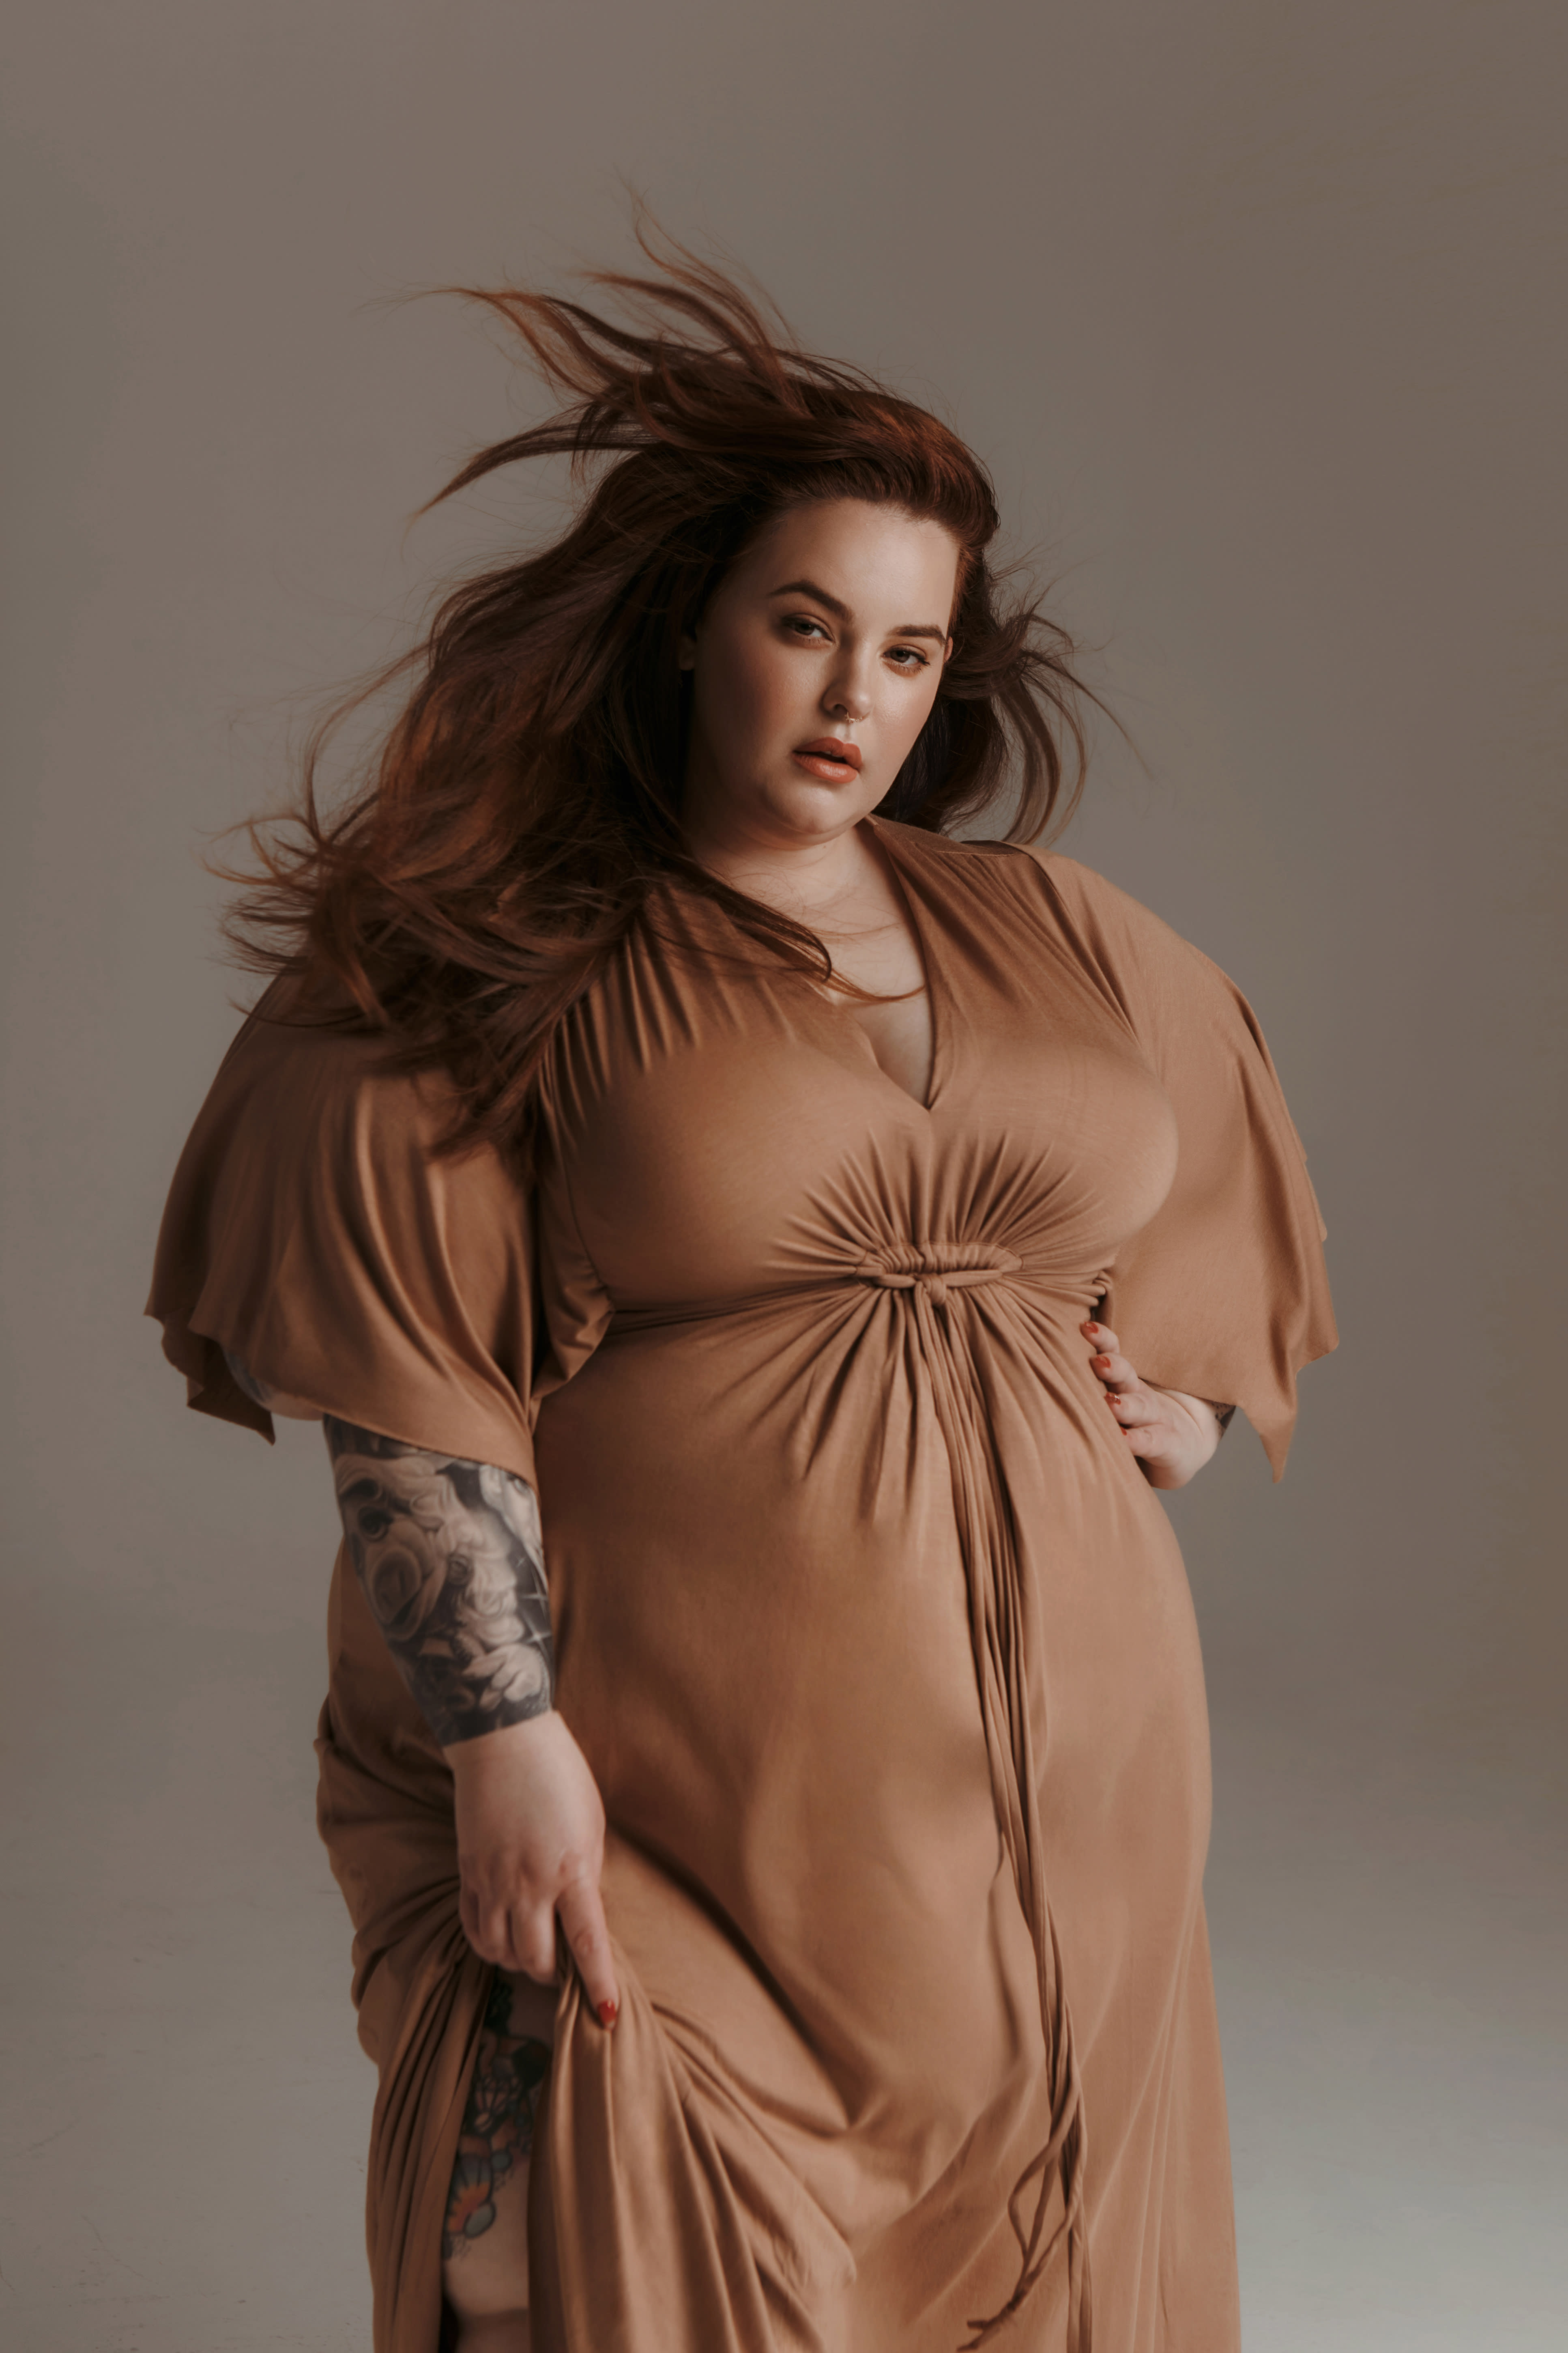 Plus Size Model Tess Holliday Strikes Co Pro Deal With Glass Entertainment Group Developing 